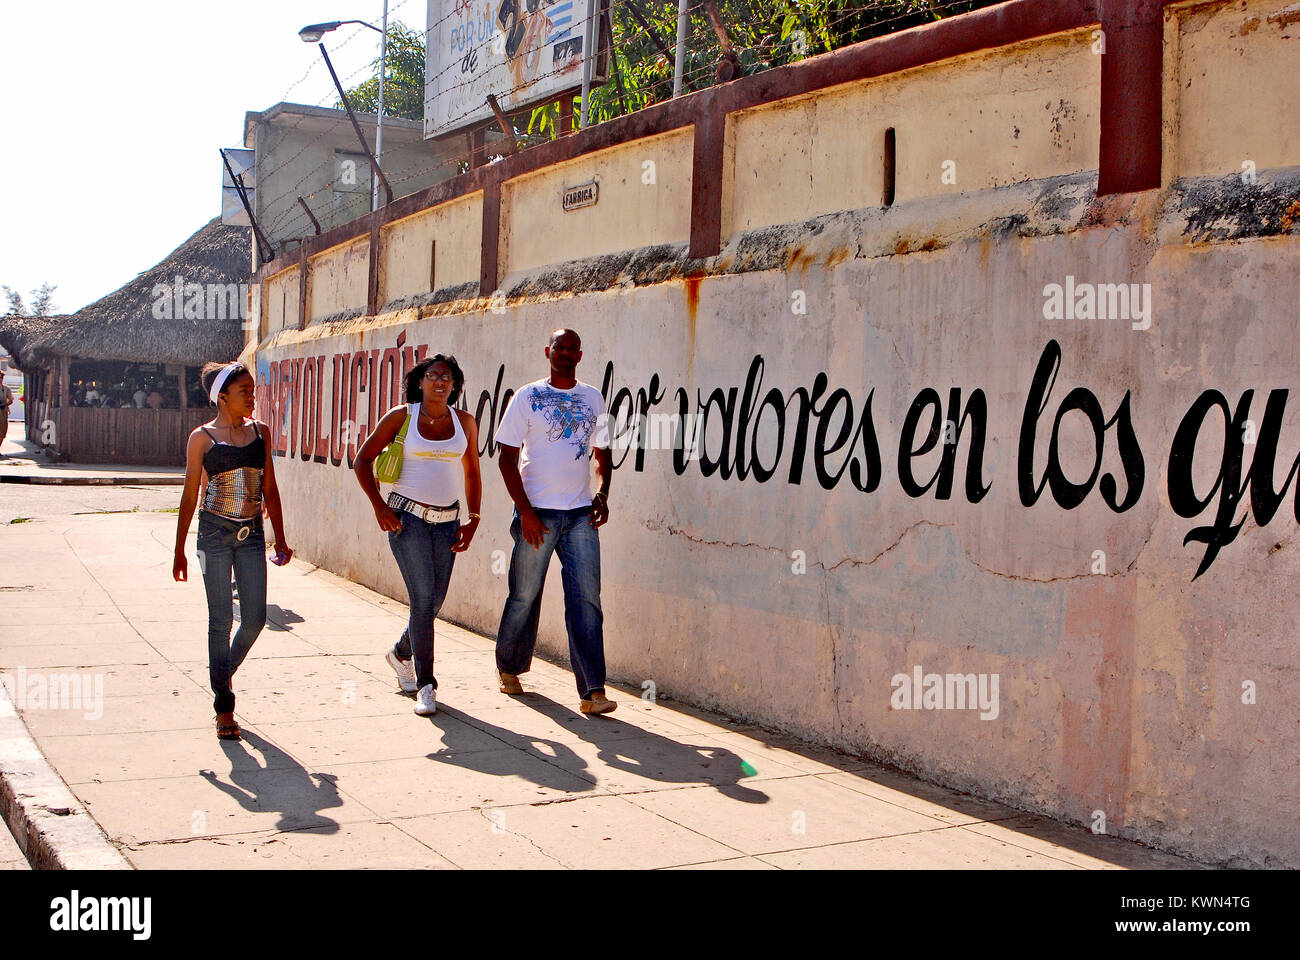 HAVANA, CUBA, MAY 11, 2009. Artistic wall writings about the communist revolution and Cuban national heroes, in Havana, on May 11th, 2009. Stock Photo